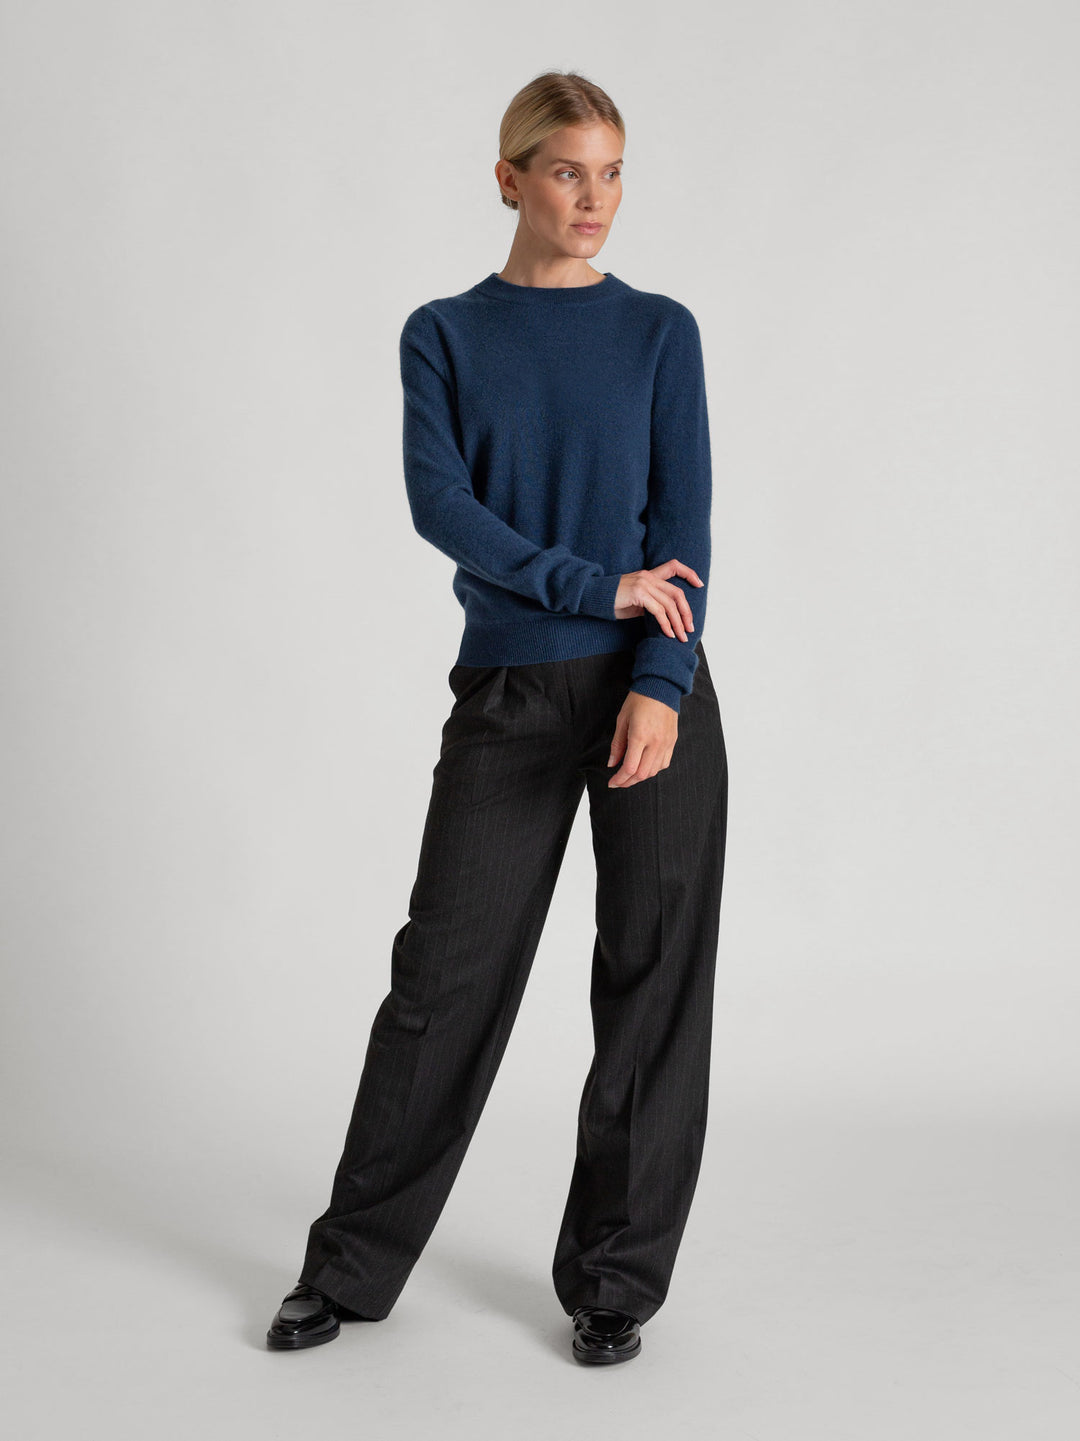 Cashmere sweater "Thora" in 100% pure cashmere. Long sleeves, round neck. Scandinavian design by Kashmina. Color: Mountain Blue.